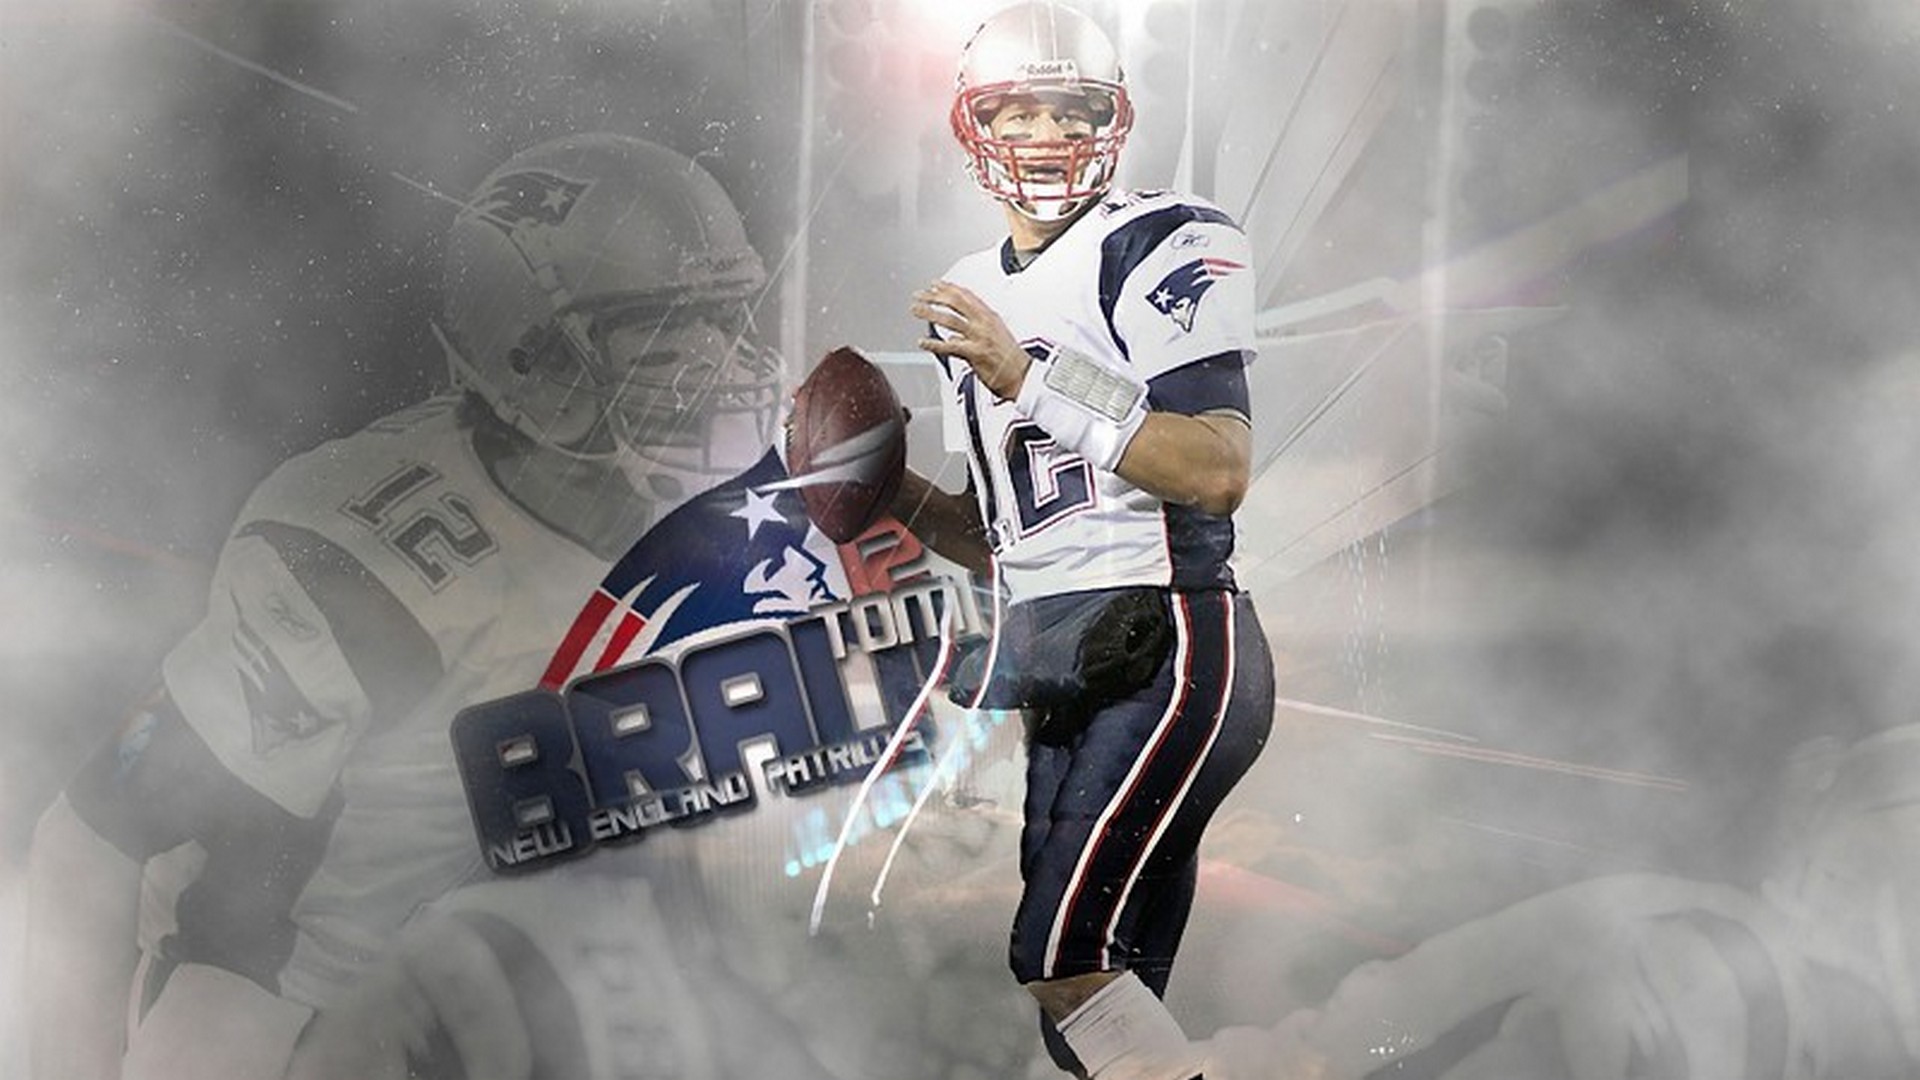 Tom Brady Patriots Desktop Wallpaper with image resolution 1920x1080 pixel. You can use this wallpaper as background for your desktop Computer Screensavers, Android or iPhone smartphones